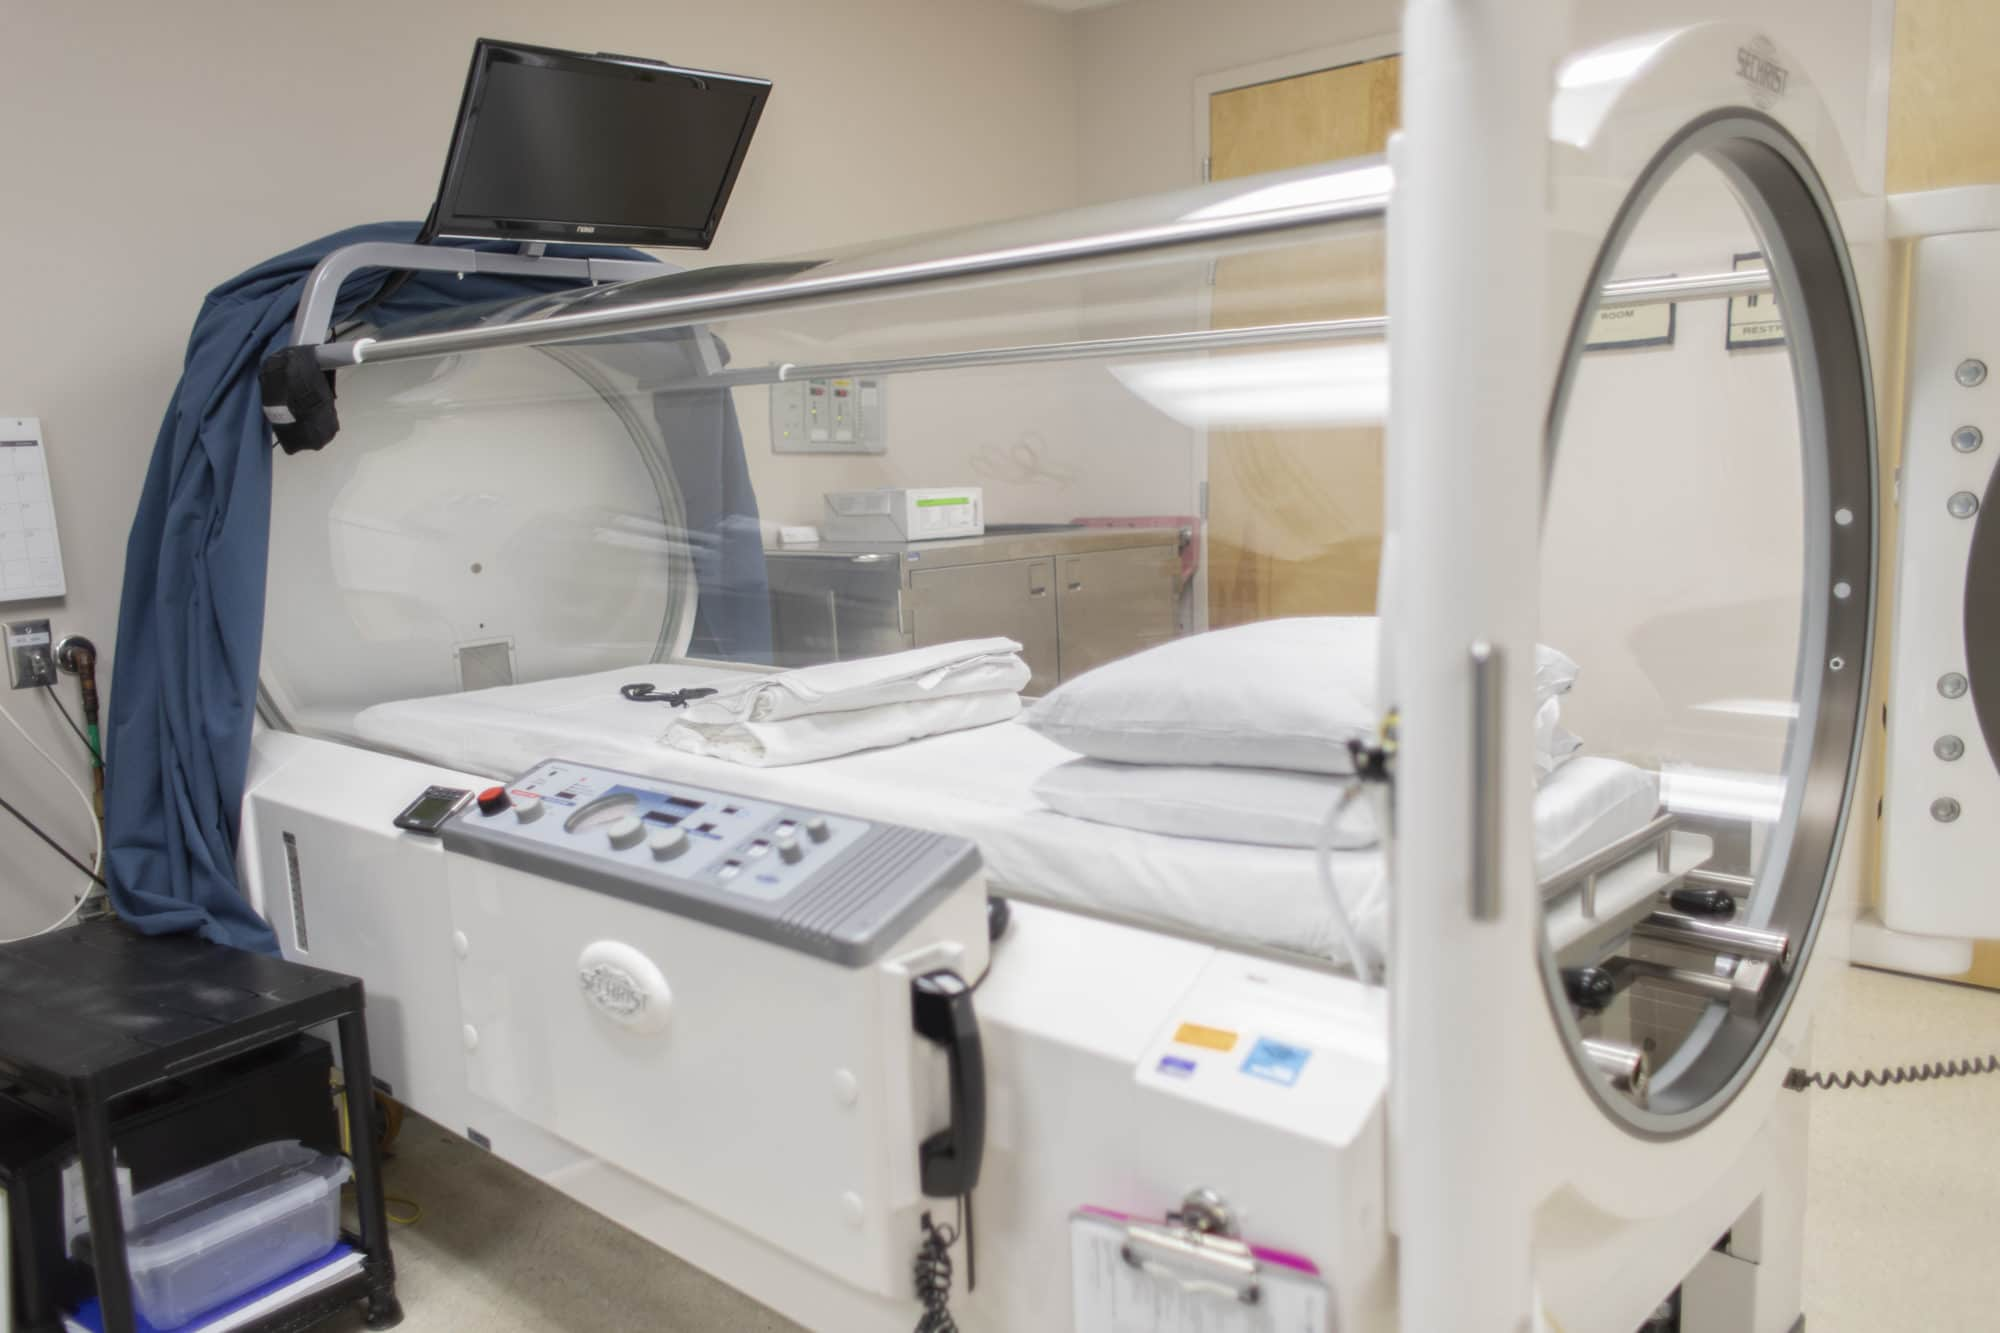 What is the procedure to finish the treatment of hyperbaric chamber?